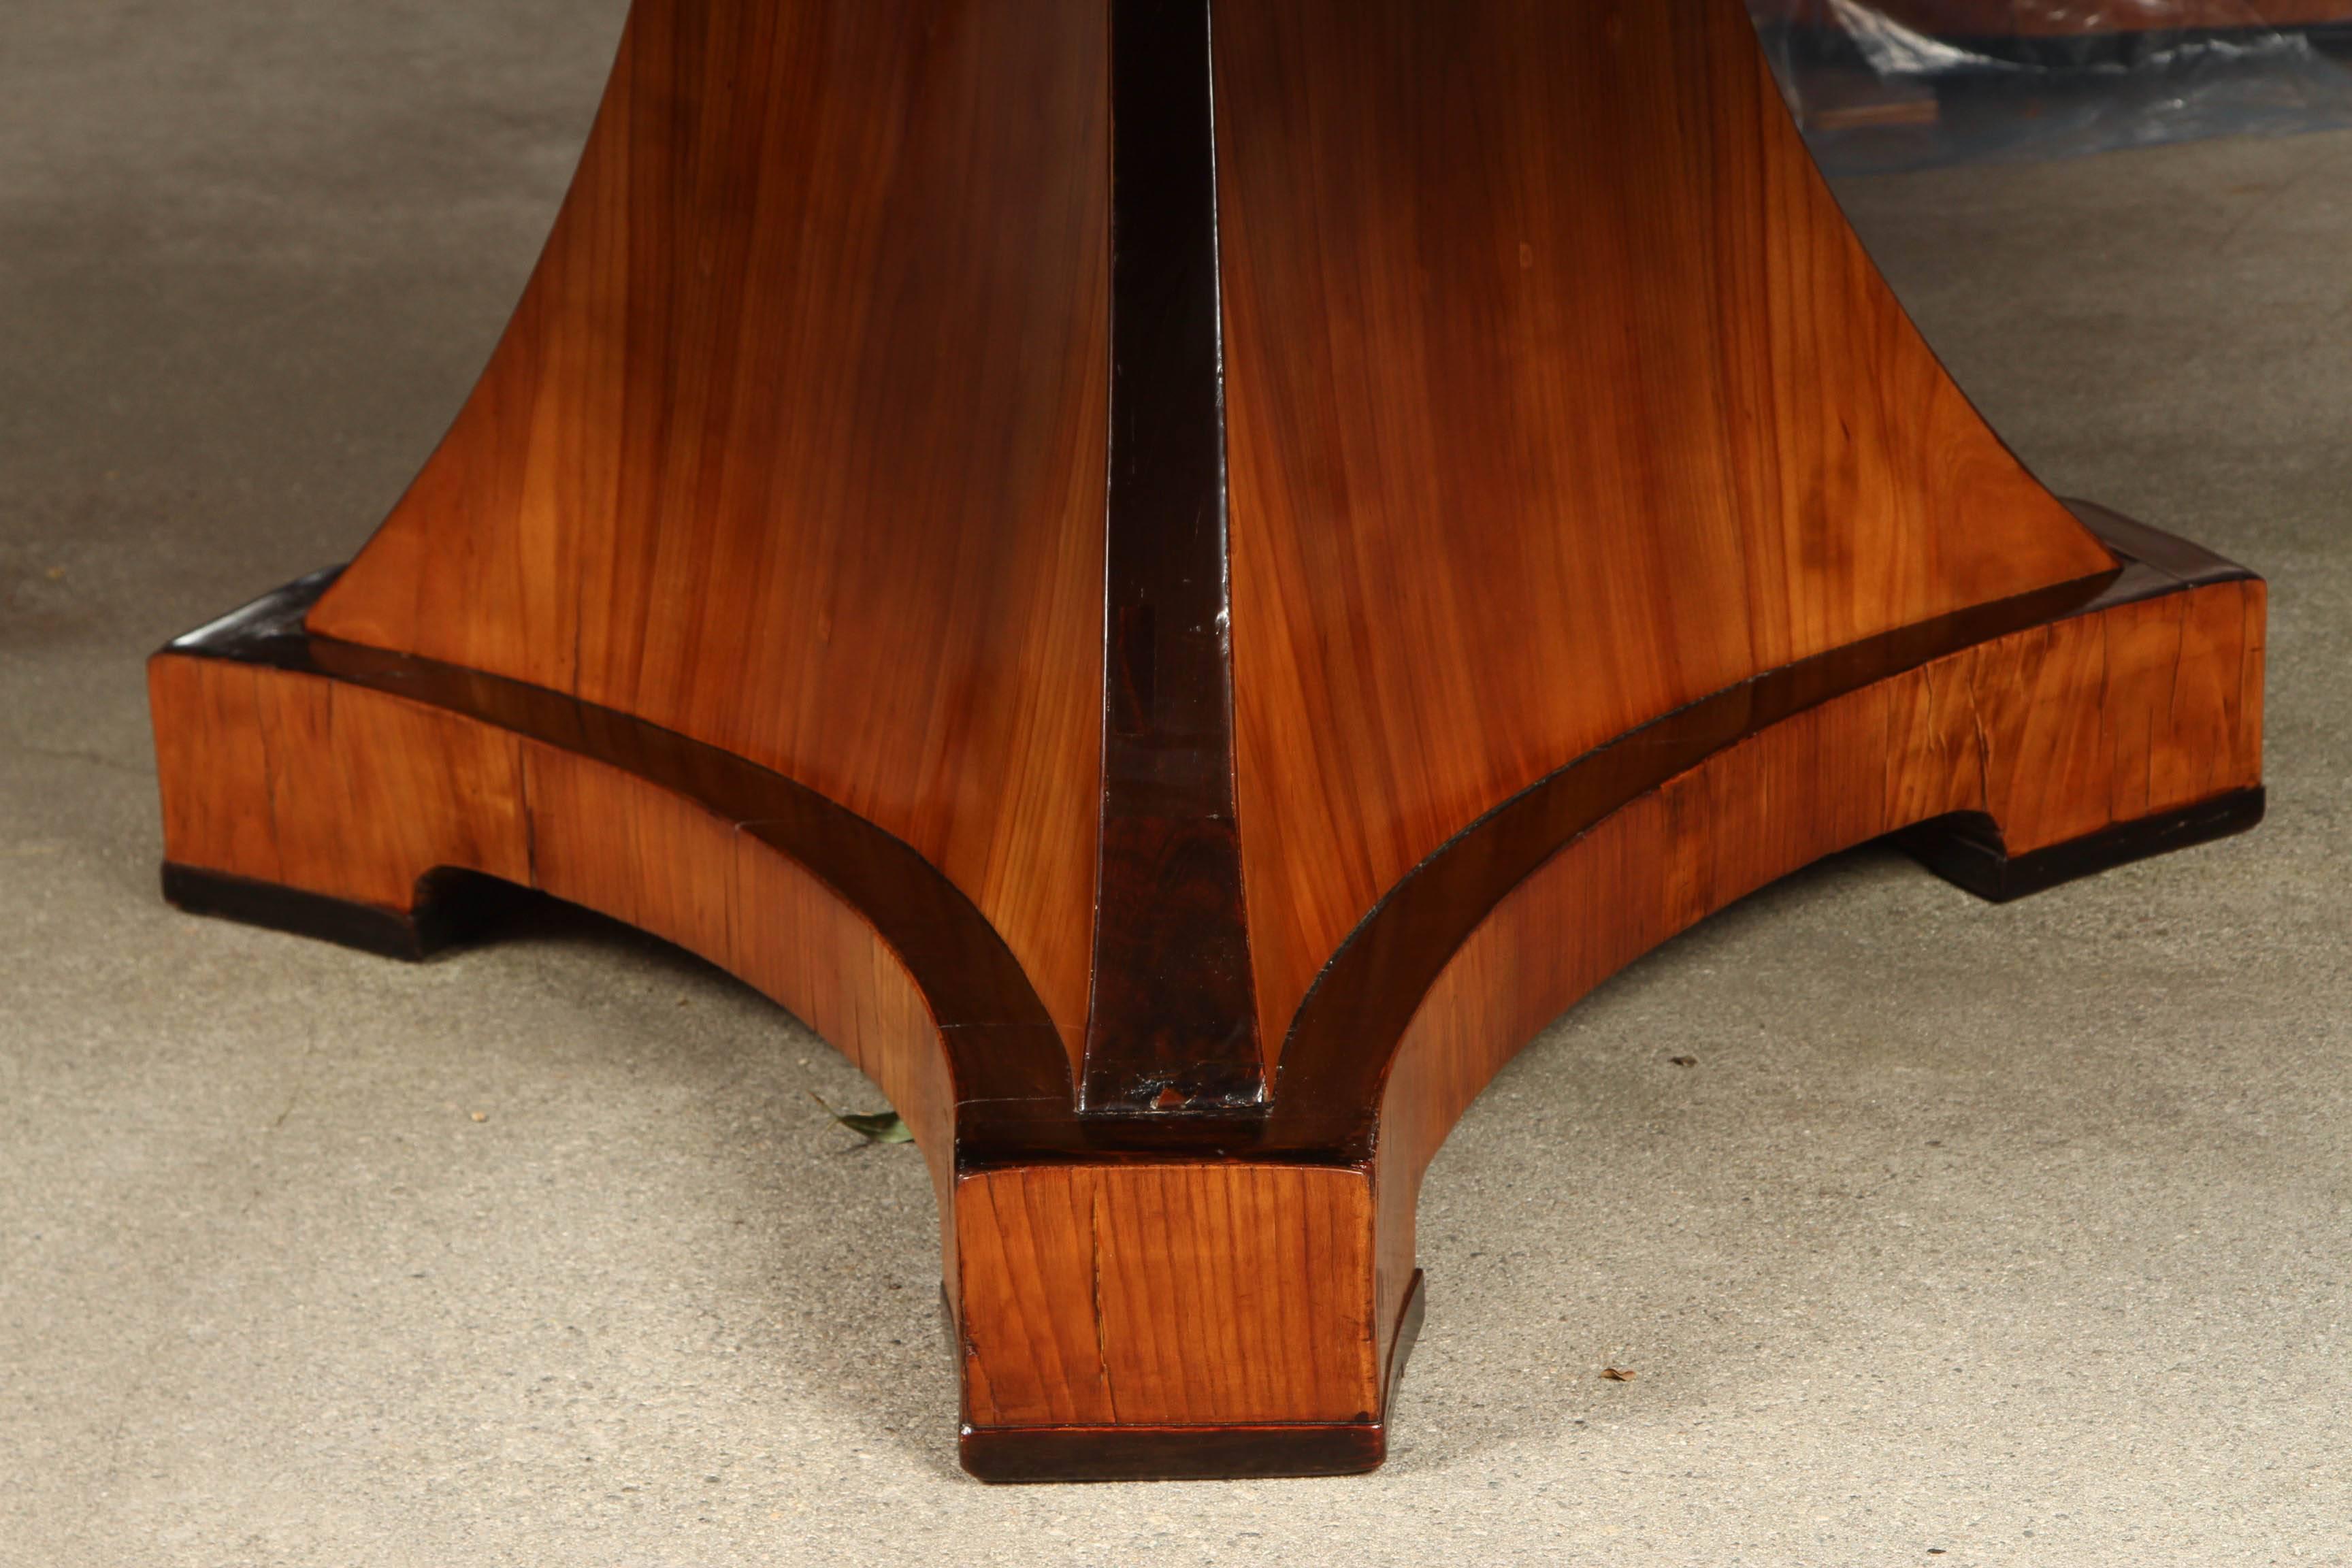 A round Biedermeier table, with a large group top on a tripartite base, with an elm veneer and ebonized trim detailing. This style of furniture, such as this lovely table, was meant to  bring both elegance and utility to owners' private lives. 